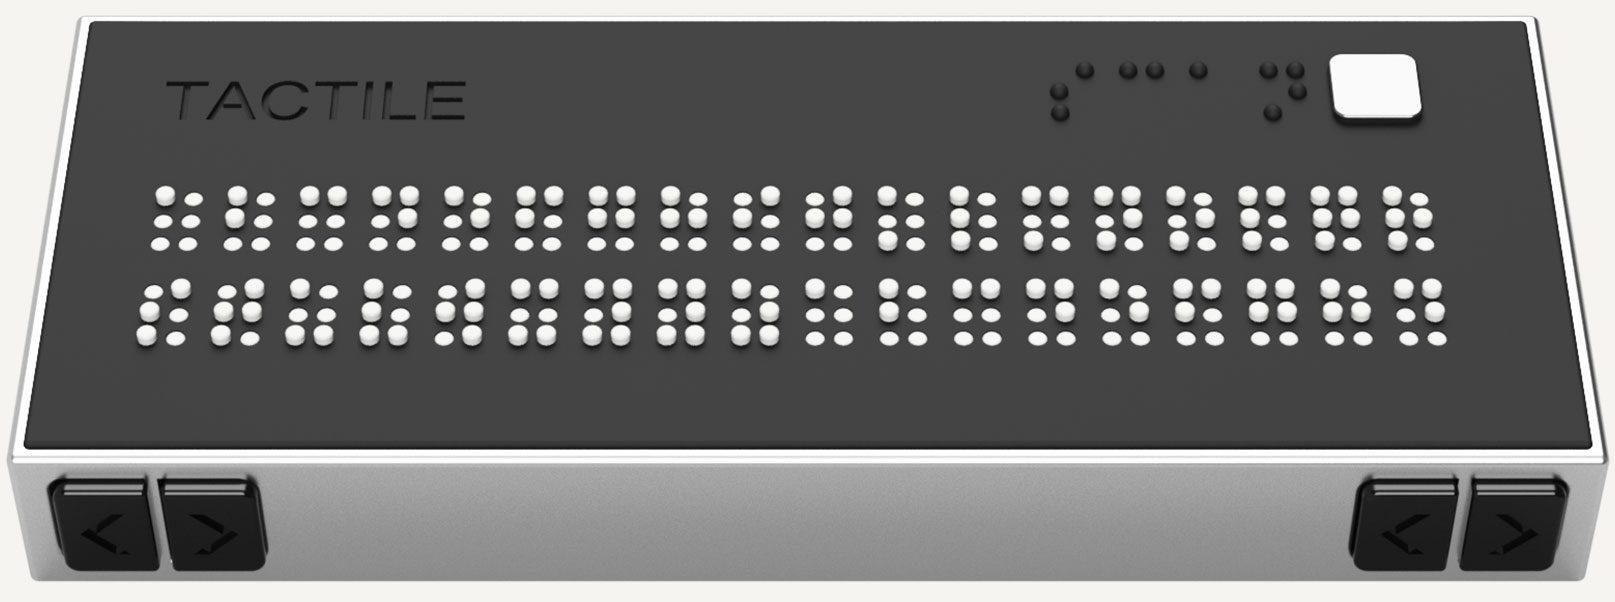 CAD rendering of a slim, rectangular black device with two rows of 18 Braille characters on its face and the word “TACTILE”